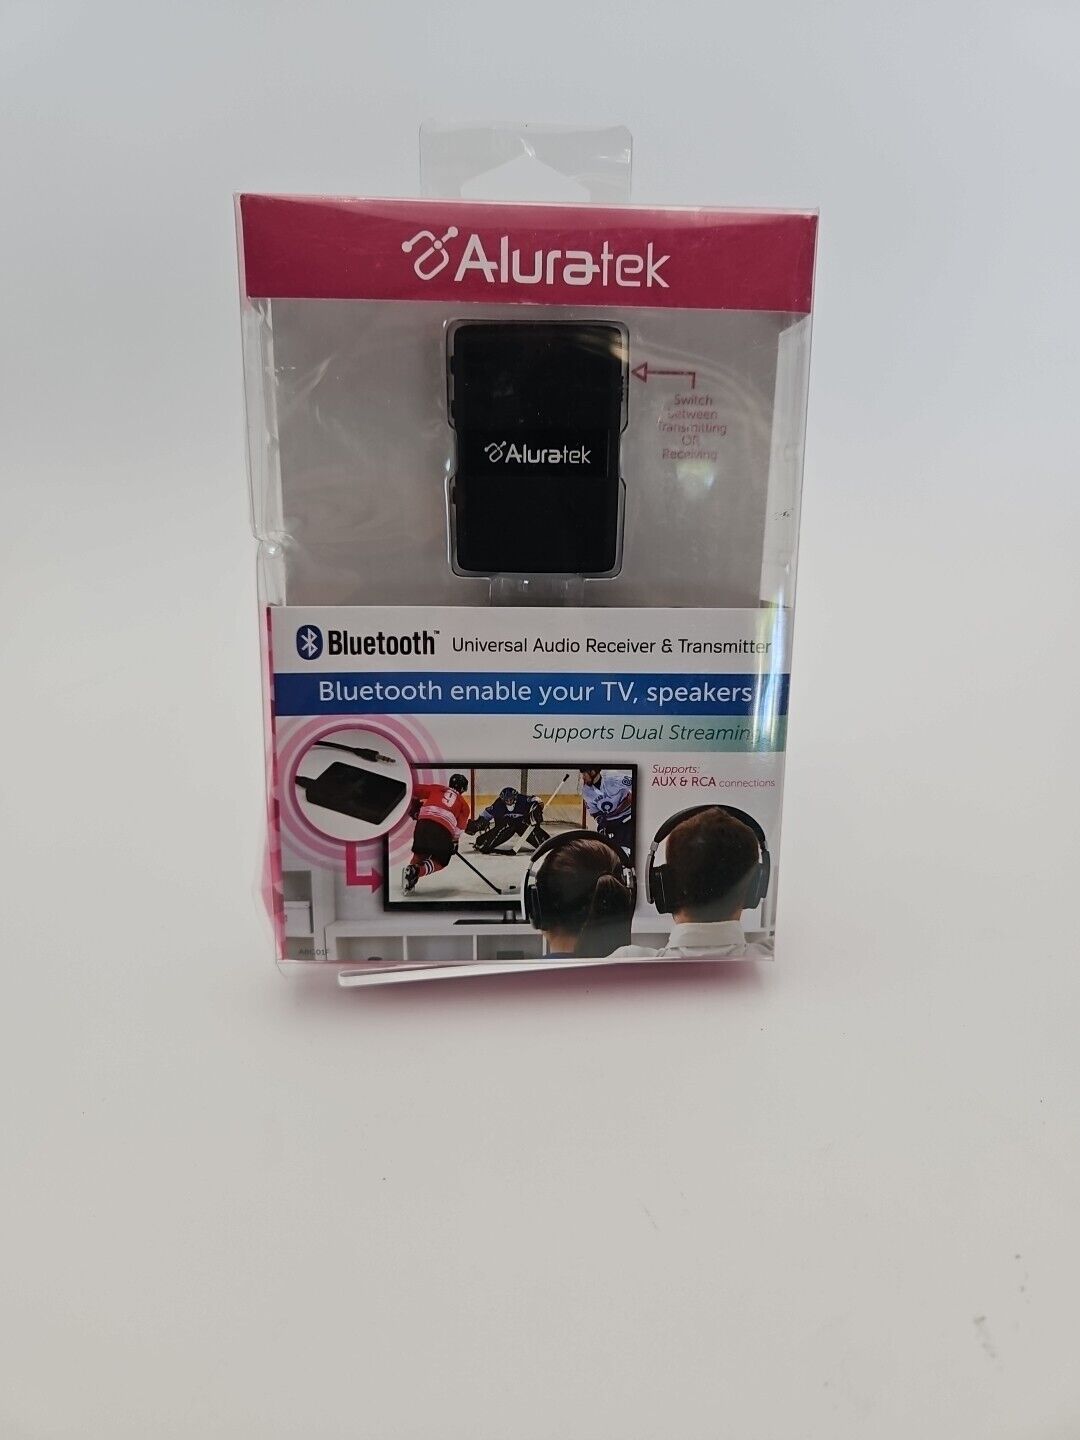 Aluratek - Bluetooth Wireless Audio Transmitter and Receiver for TV and other...